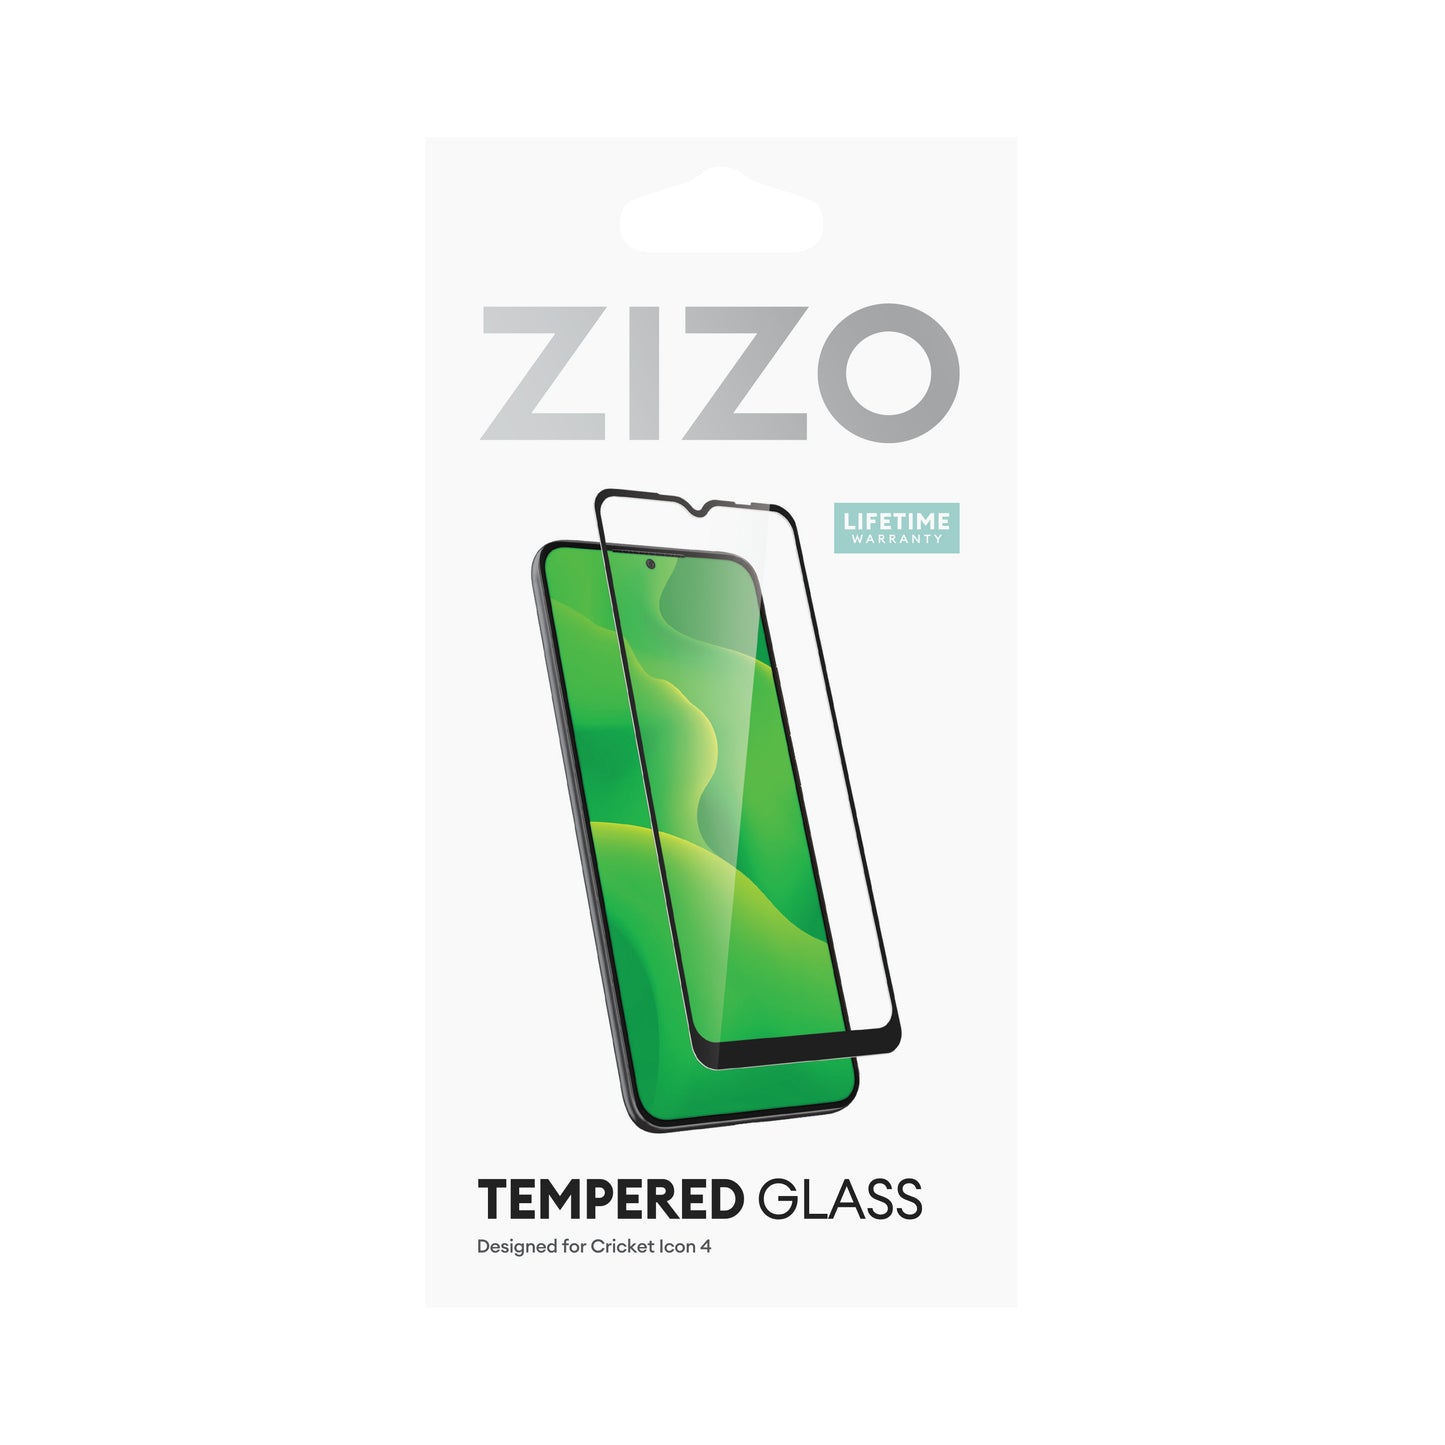 ZIZO TEMPERED GLASS Screen Protector for Cricket Icon 4